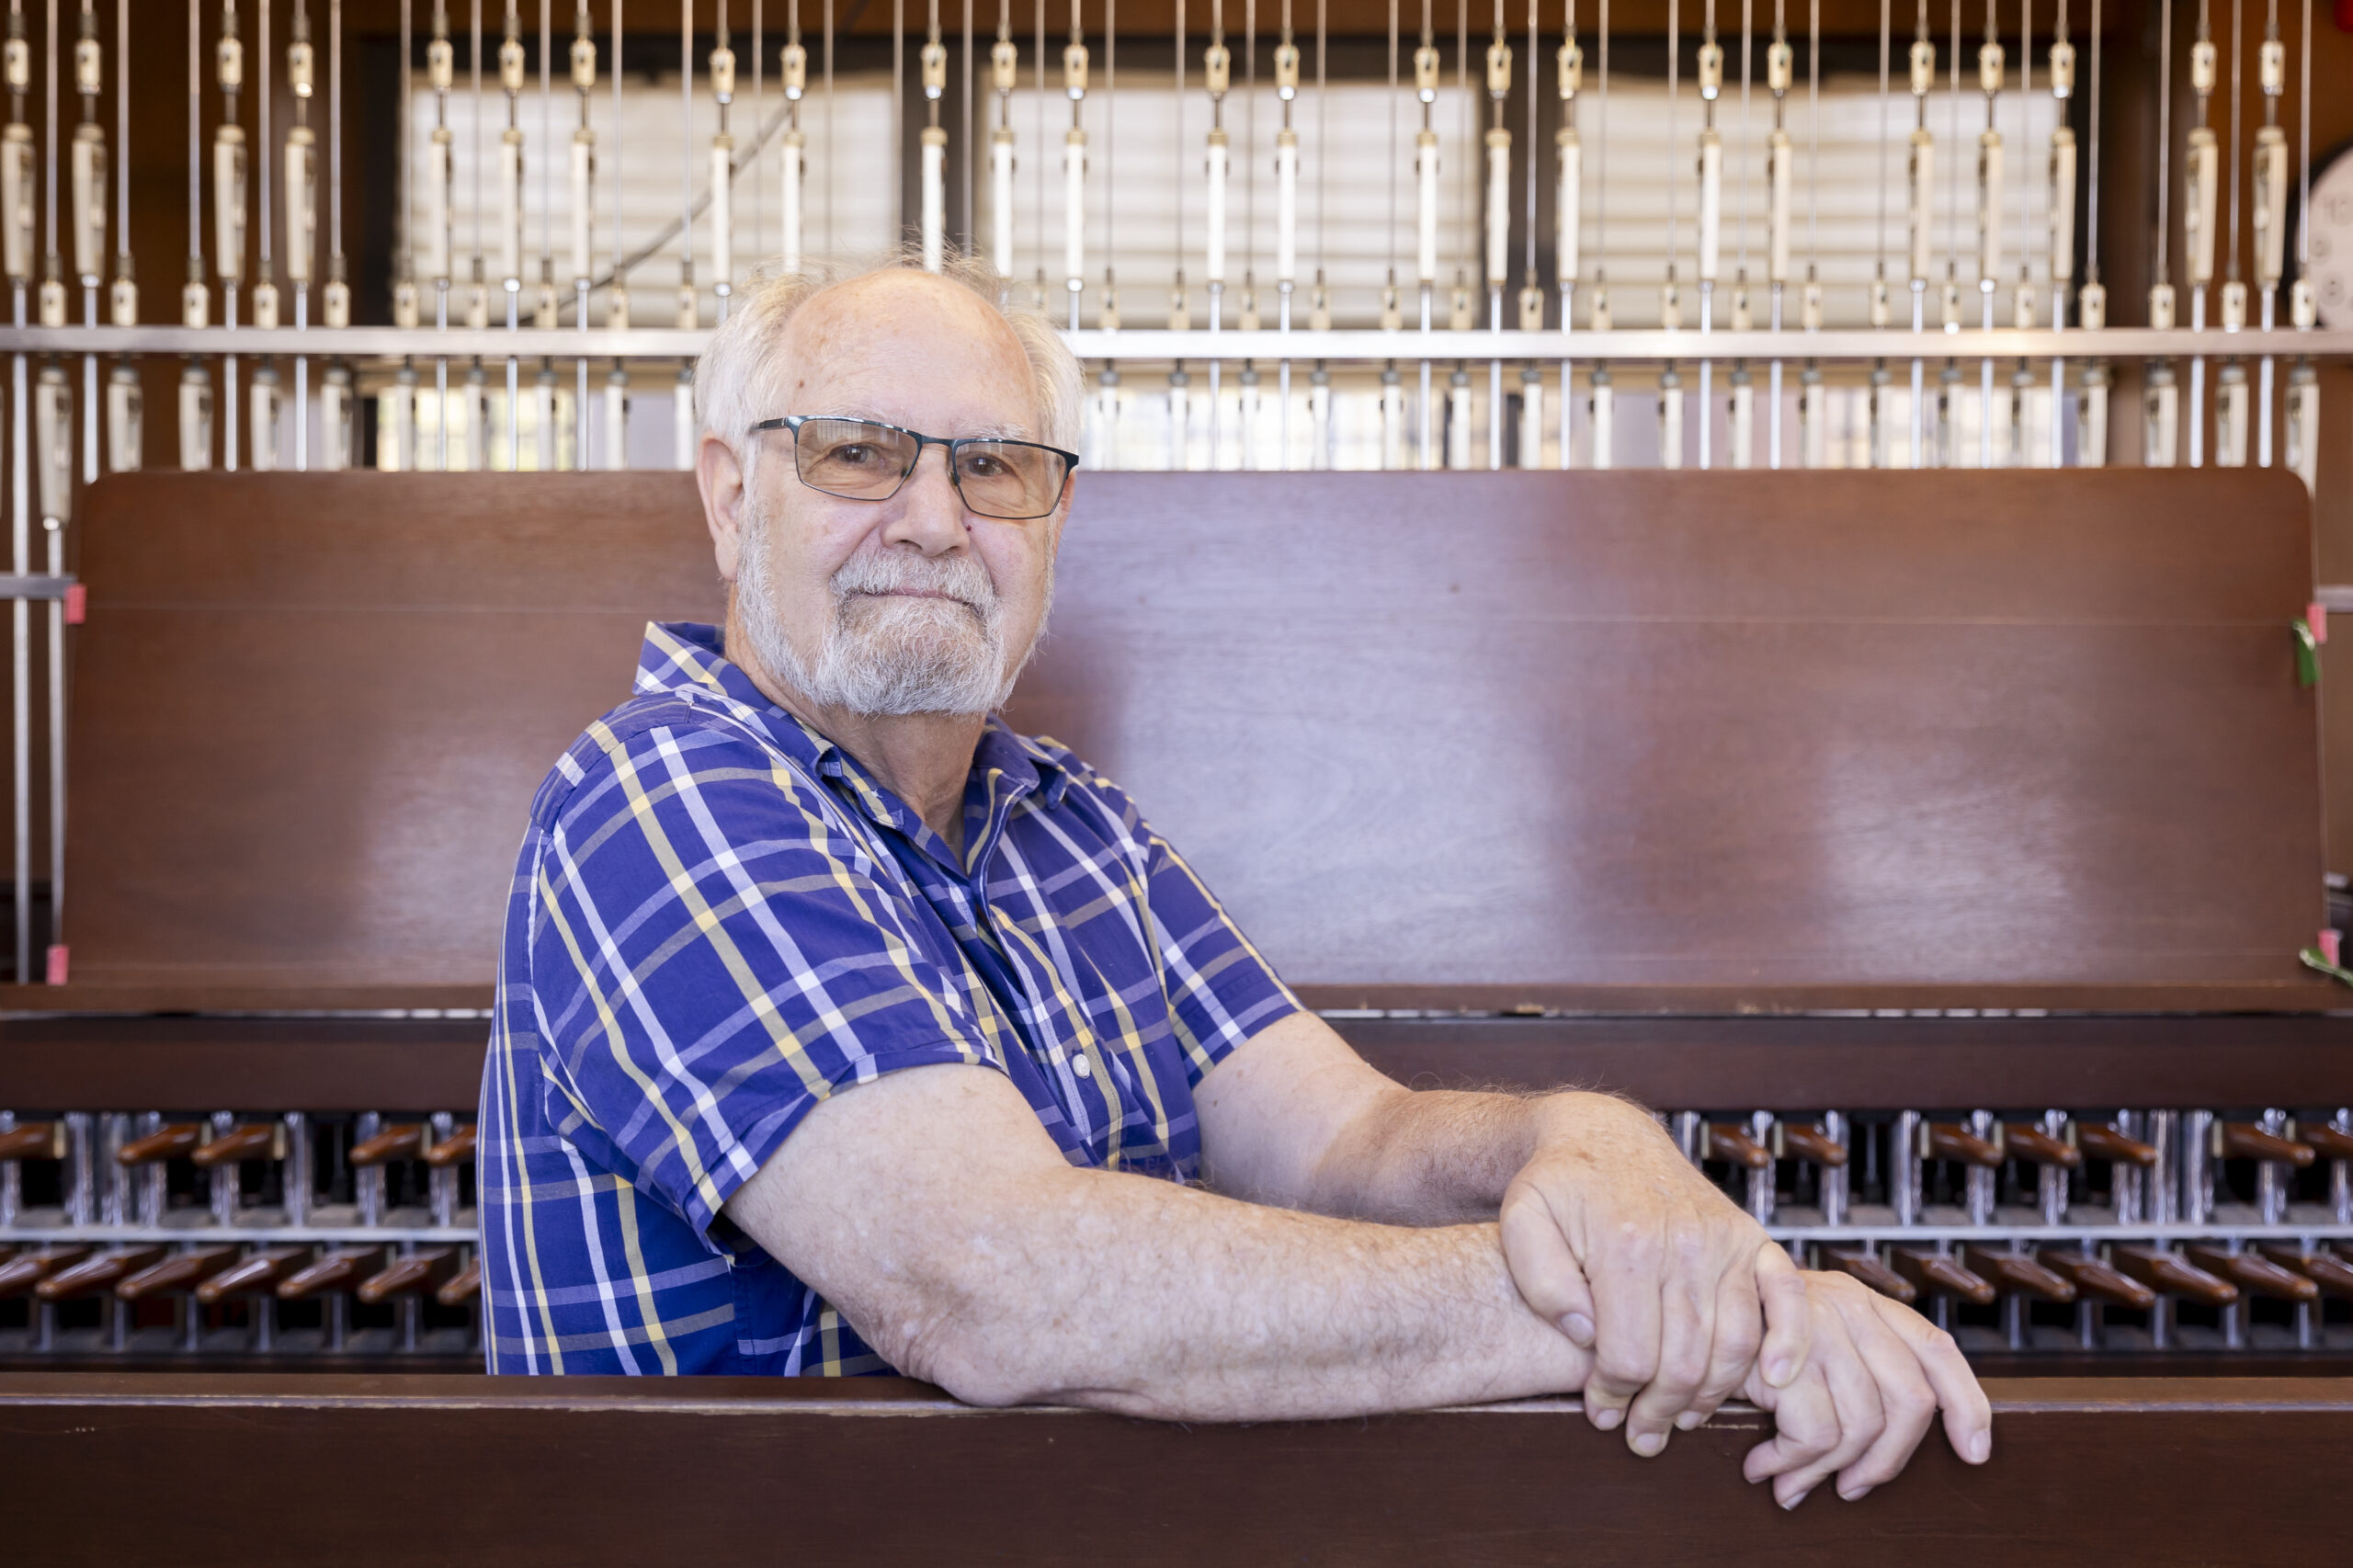 Jeff Davis, the retiring university carillonist, sits on the bench of the grand carillon on the observation deck of the Campanile. His body is turned toward the camera and he's wearing eye glasses, a beard, a short-sleeved plaid shirt and a smile.